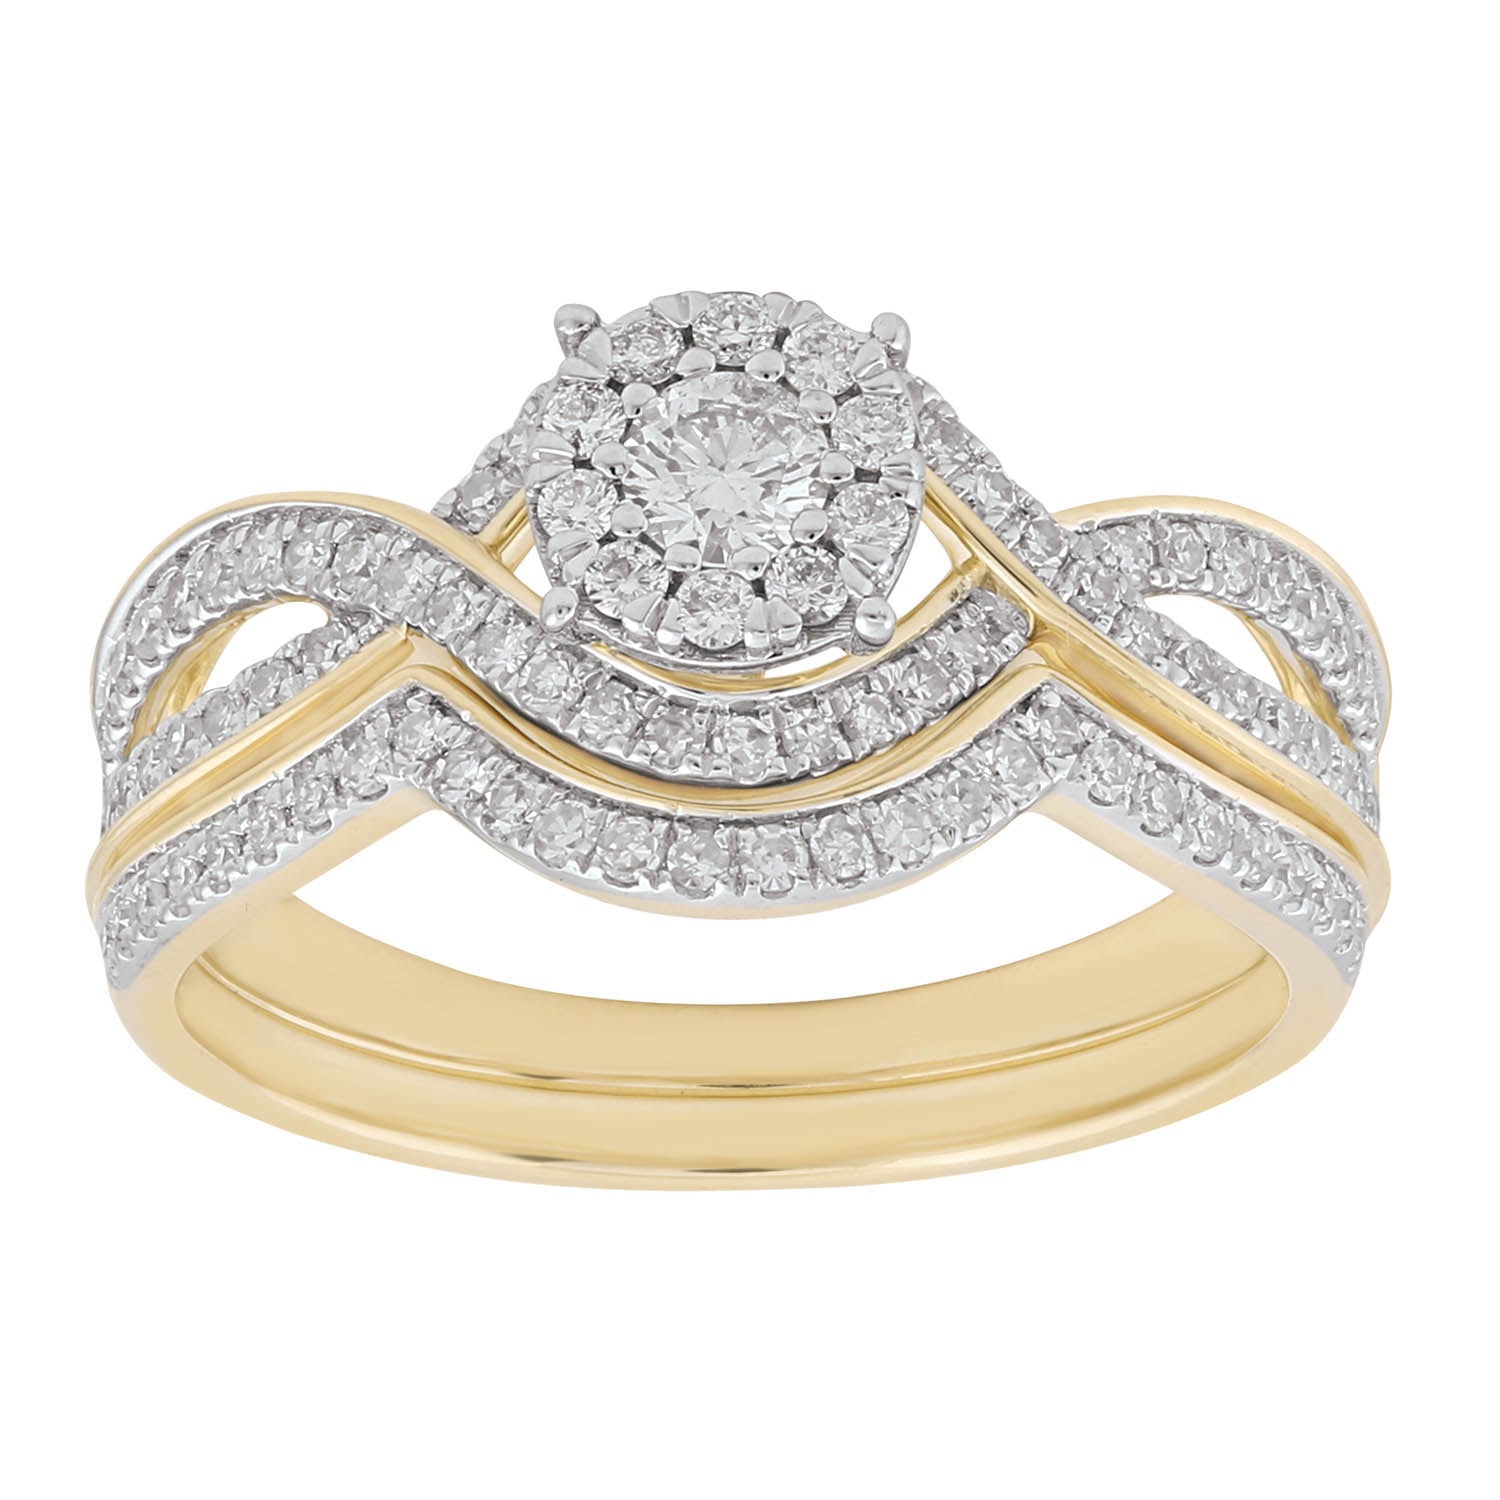 Engagment & Wedding Ring Set with 0.5ct Diamonds in 9K Yellow Gold